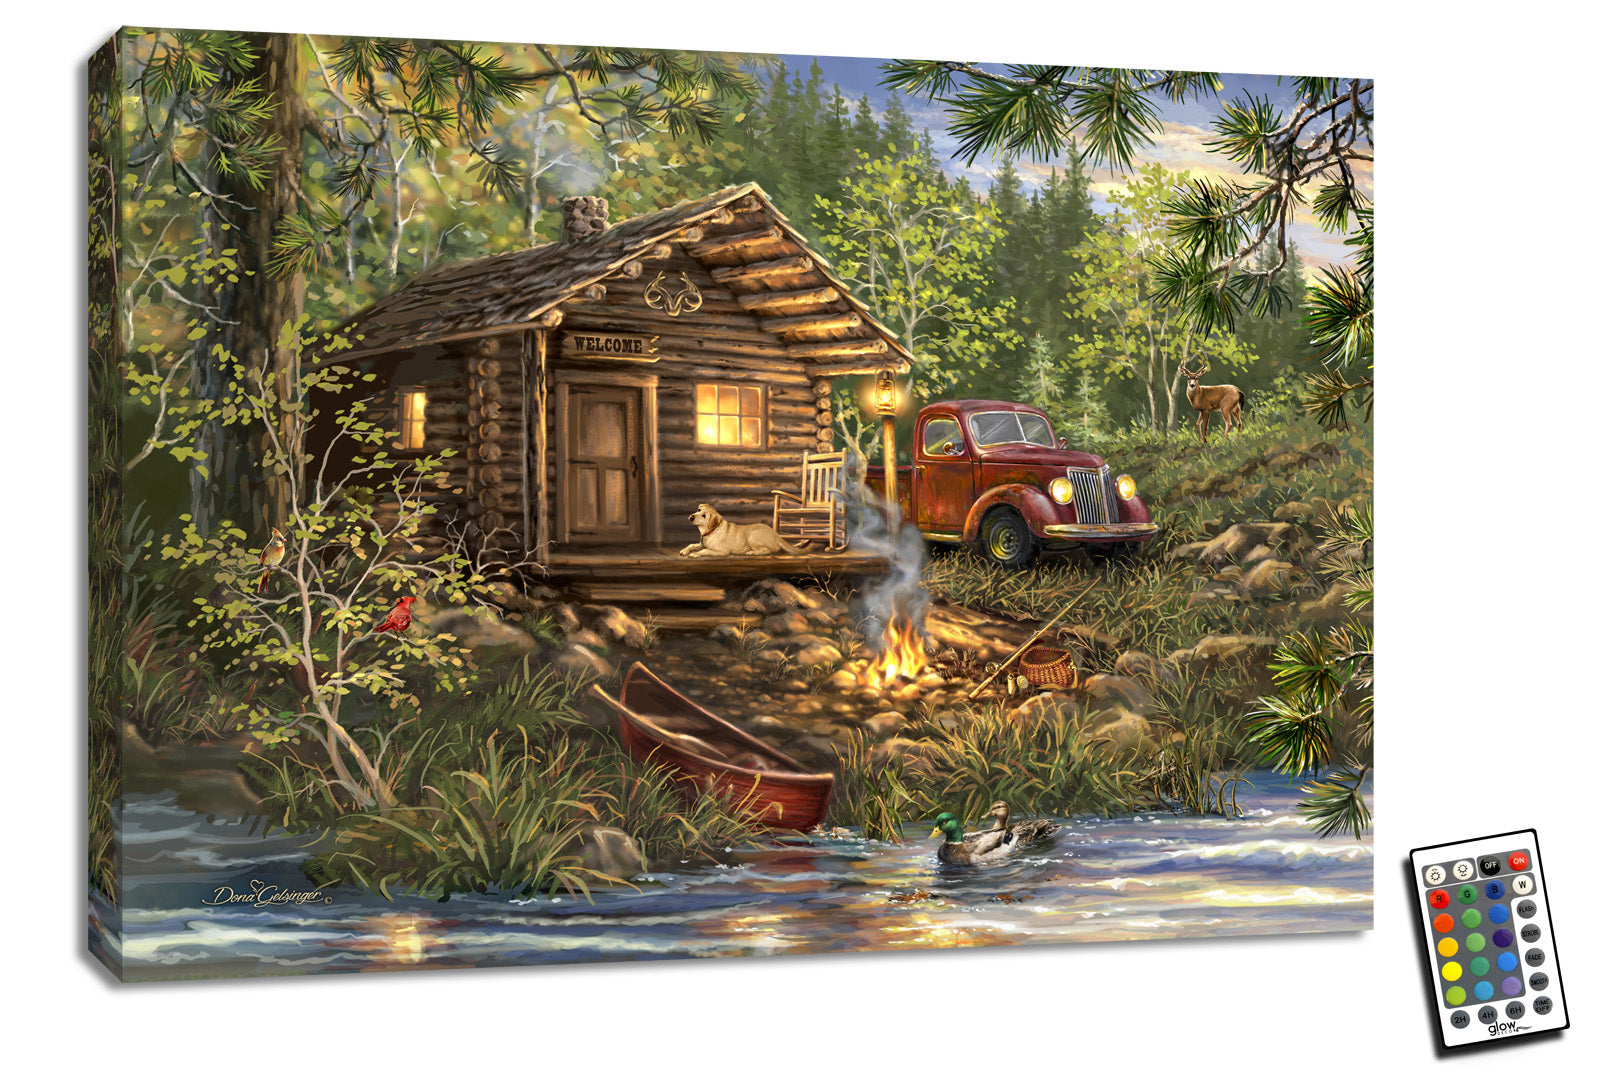  This charming piece features a picturesque scene of a little cabin nestled among the trees, complete with an old-fashioned red truck parked nearby, a loyal golden retriever, a crackling campfire, and a serene canoe waiting by the water's edge.